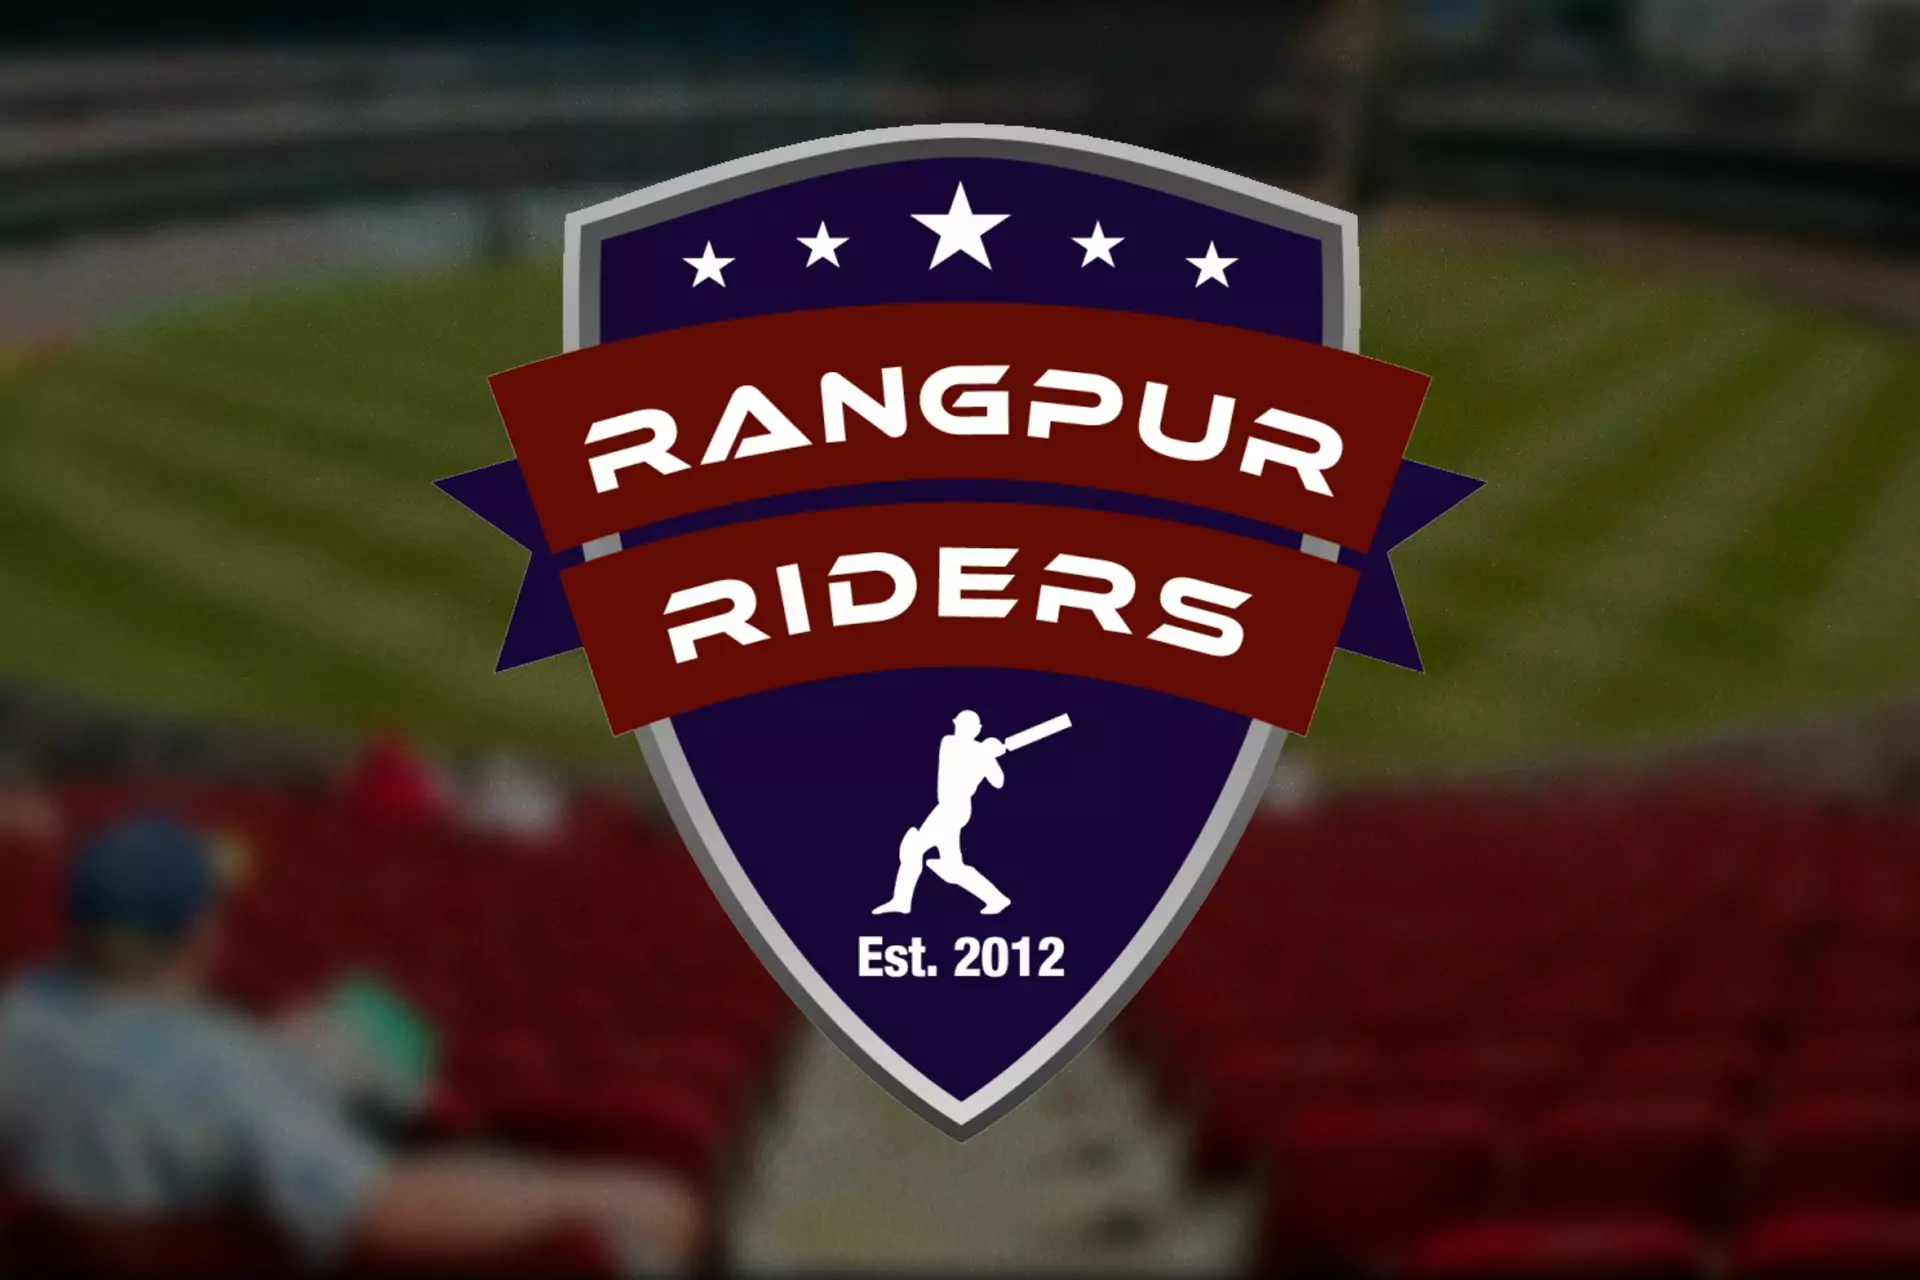 Rangpur Riders is a team that joined the league in 2013.